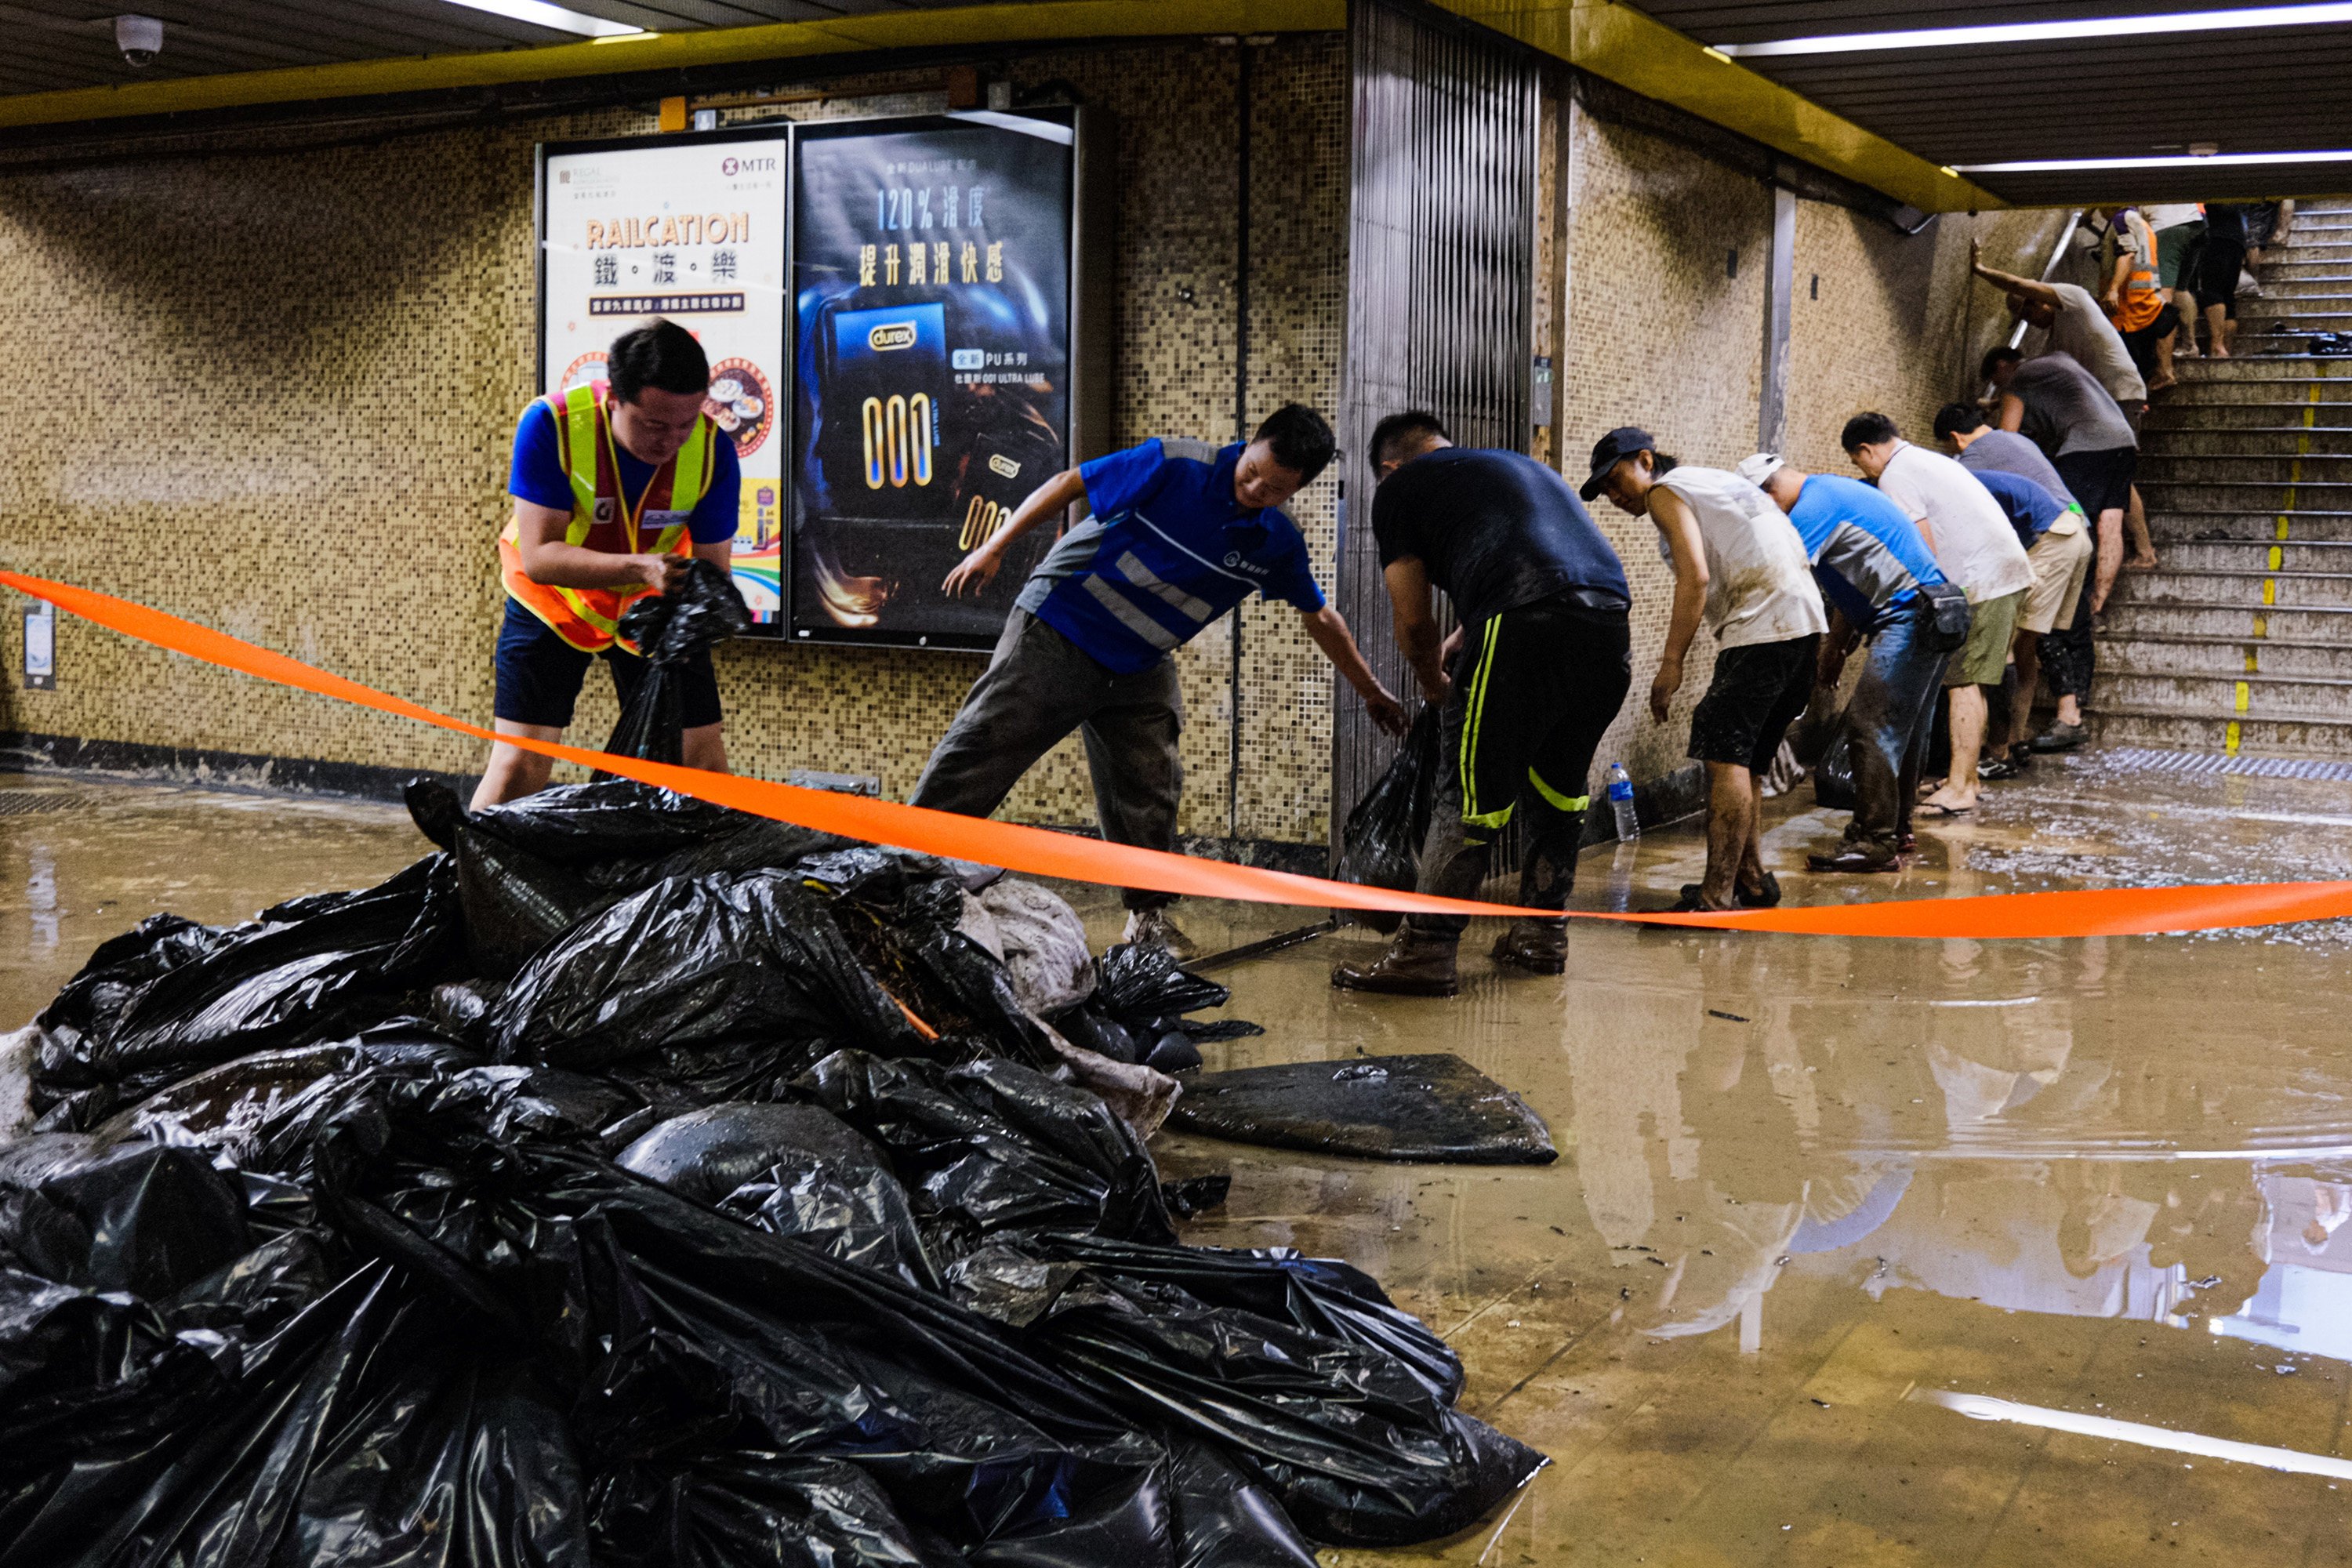 Volunteers clean up an MTR station on September 8, after record rainfall leads to flooding in Hong Kong. Photo: TNS